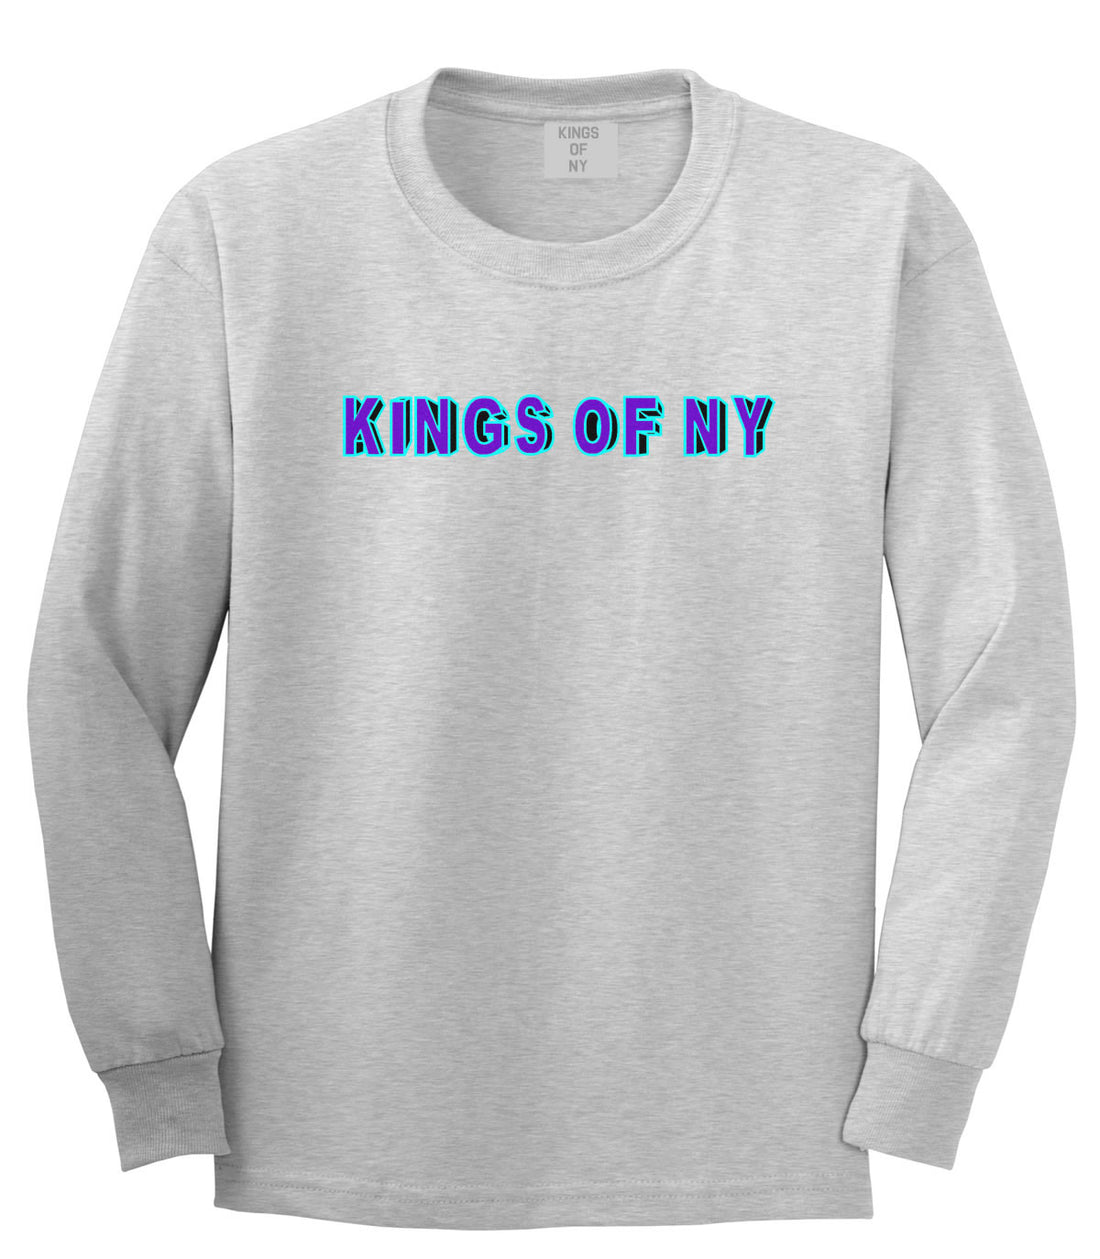 Bright Block Letters Long Sleeve T-Shirt in Grey by Kings Of NY